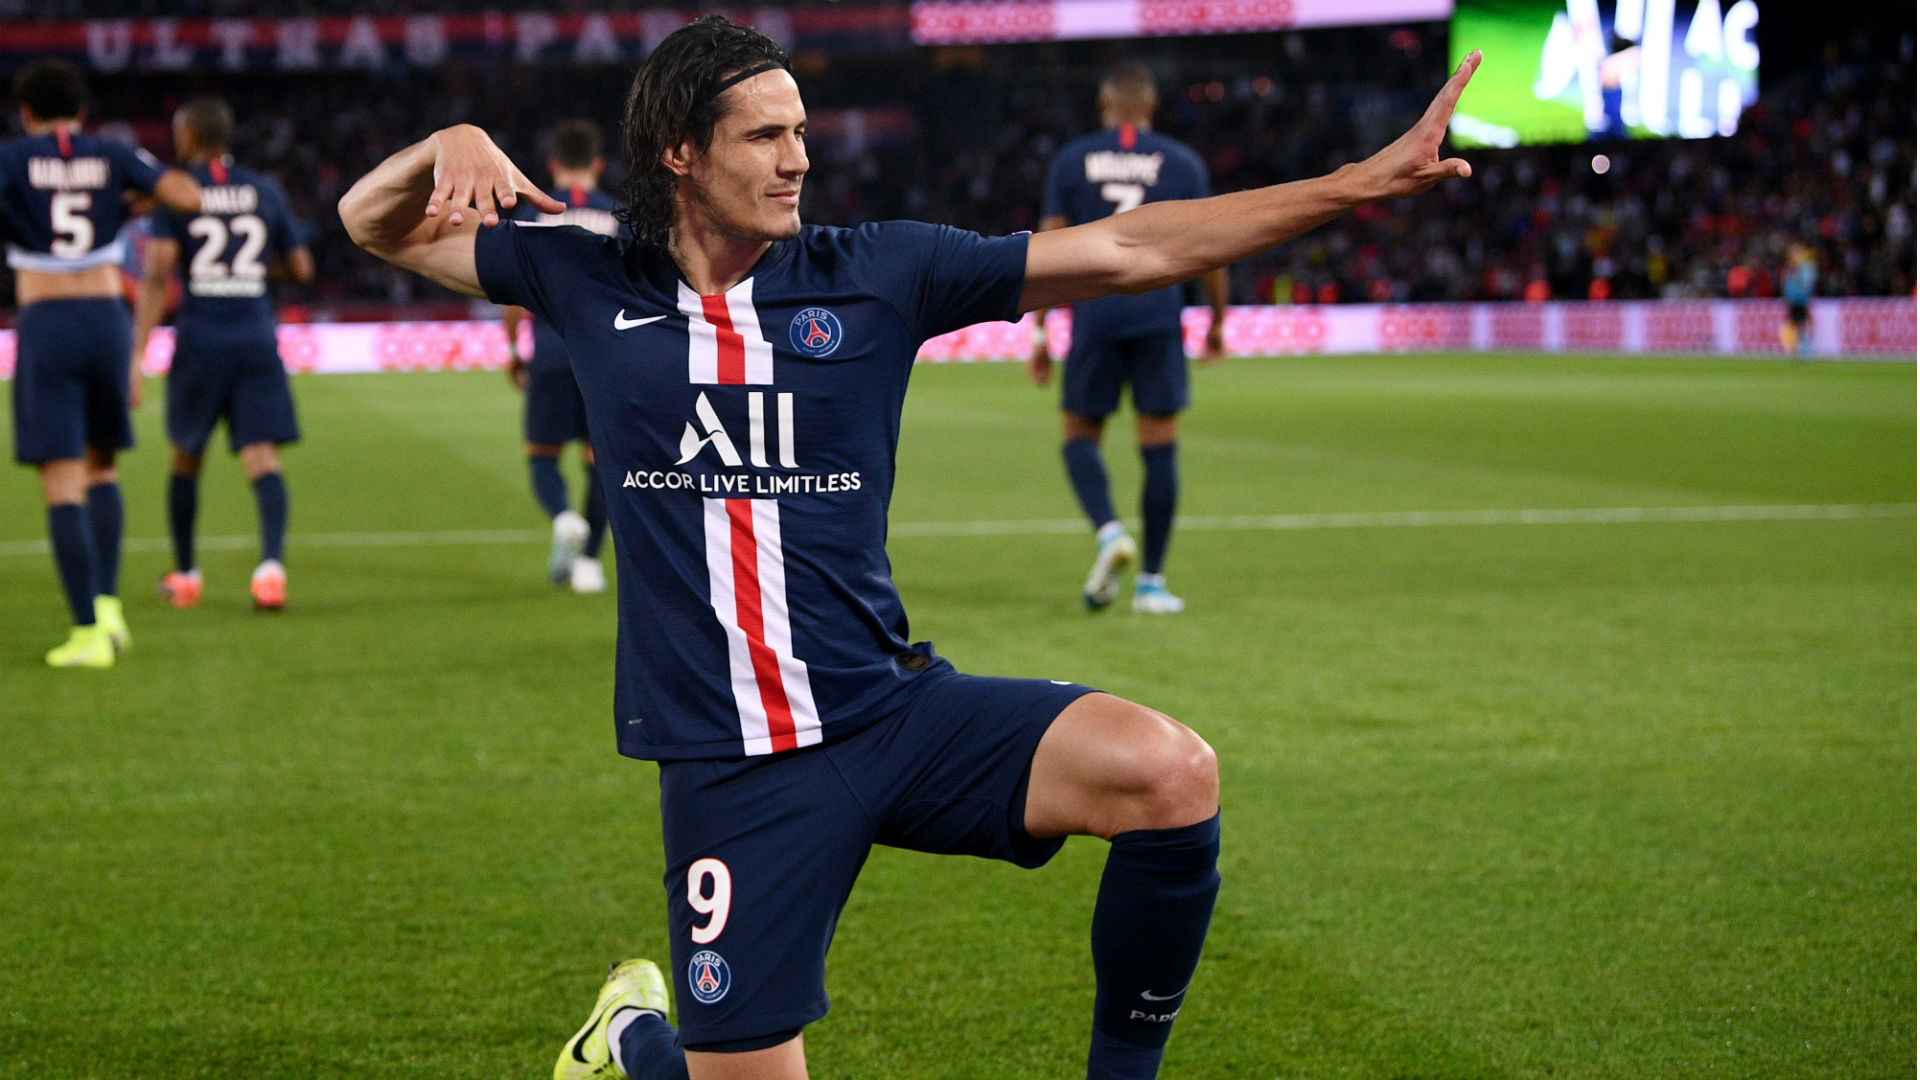 'Cavani would be a spectacular signing for Atletico' - Forlan backs PSG star to complete La Liga transfer